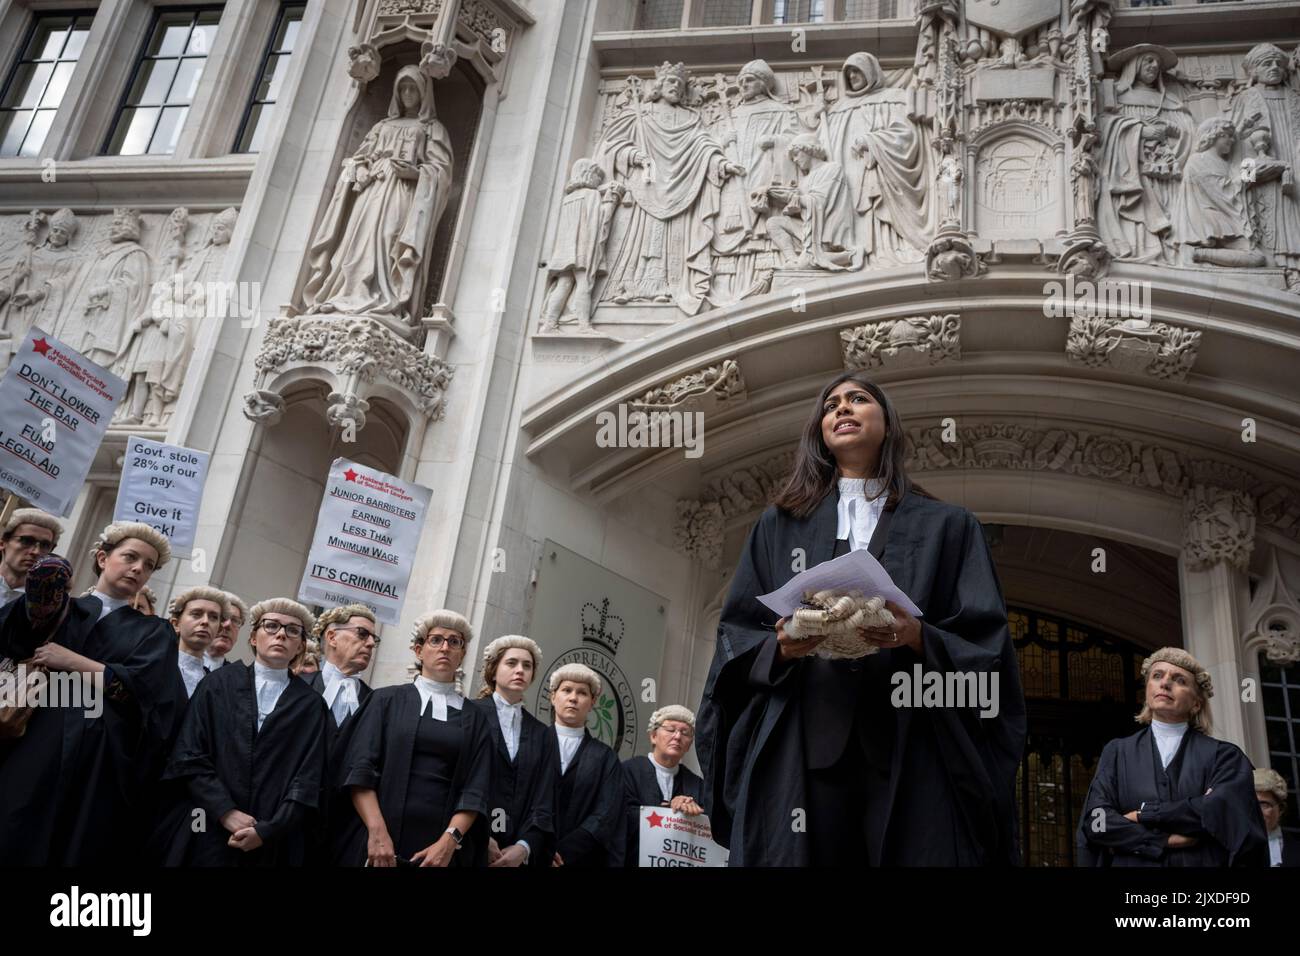 Barristers continue their indefinite strike action with a protest outside the Supreme Court over poor working conditions and low pay due to an insufficient increase in Legal Aid fees, on 6th September 2022, in London, England. Barristers began their first indefinite all-out strike on Monday over demands for an immediate 25% increase in legal aid fees, after a fall in their real earnings of 28%. The Ministry of Justice (MoJ) has offered 15% but it will apply only to new cases, There is currently a backlog of about 60,000 cases. Stock Photo